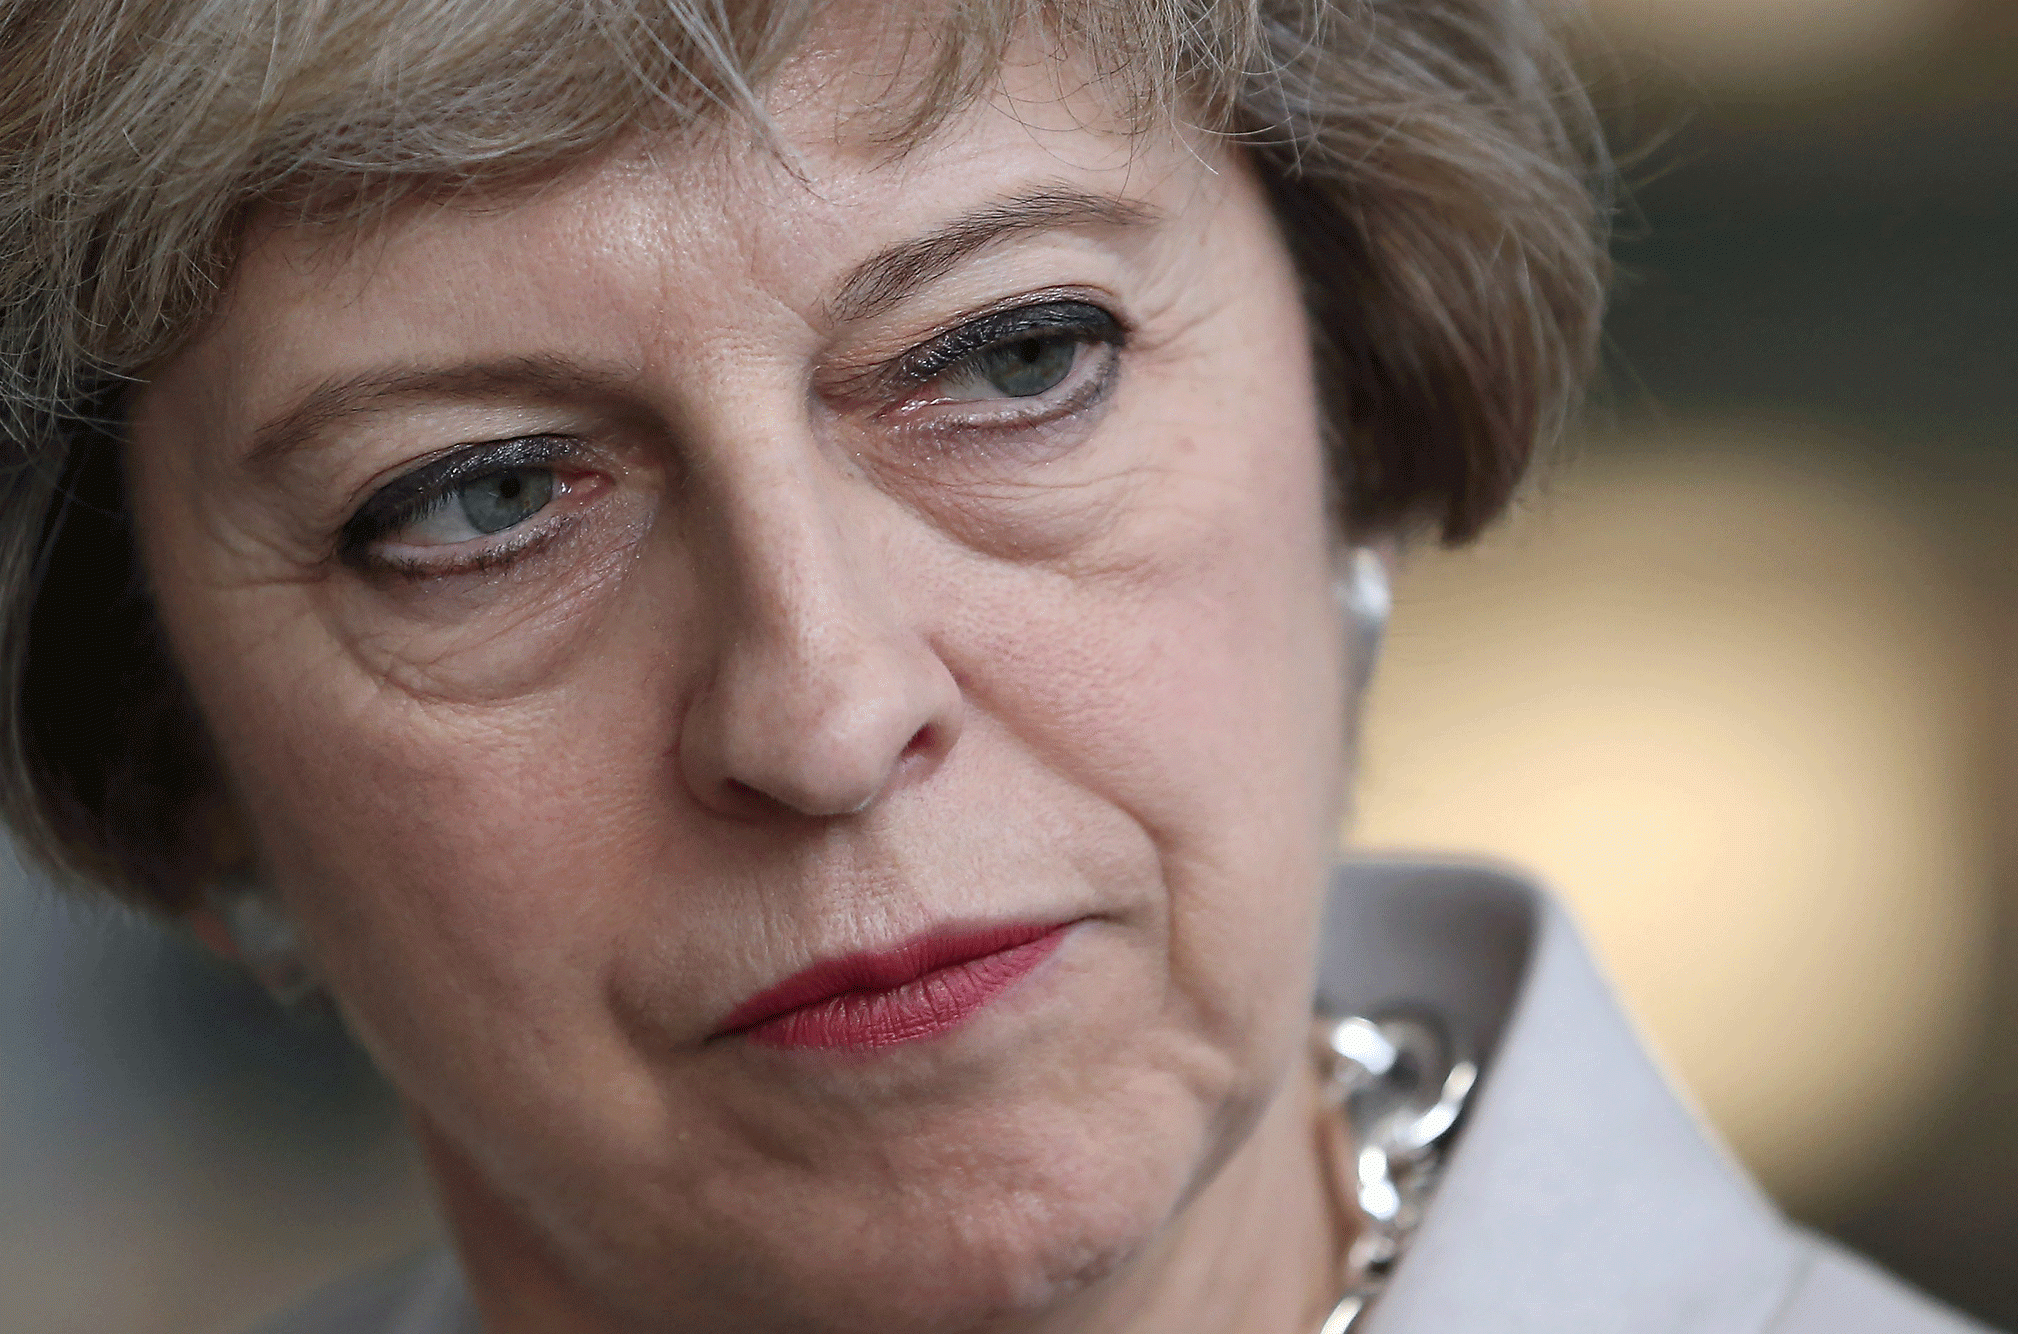 Theresa May can now move ahead with her plans for stronger intelligence powers, Reuters